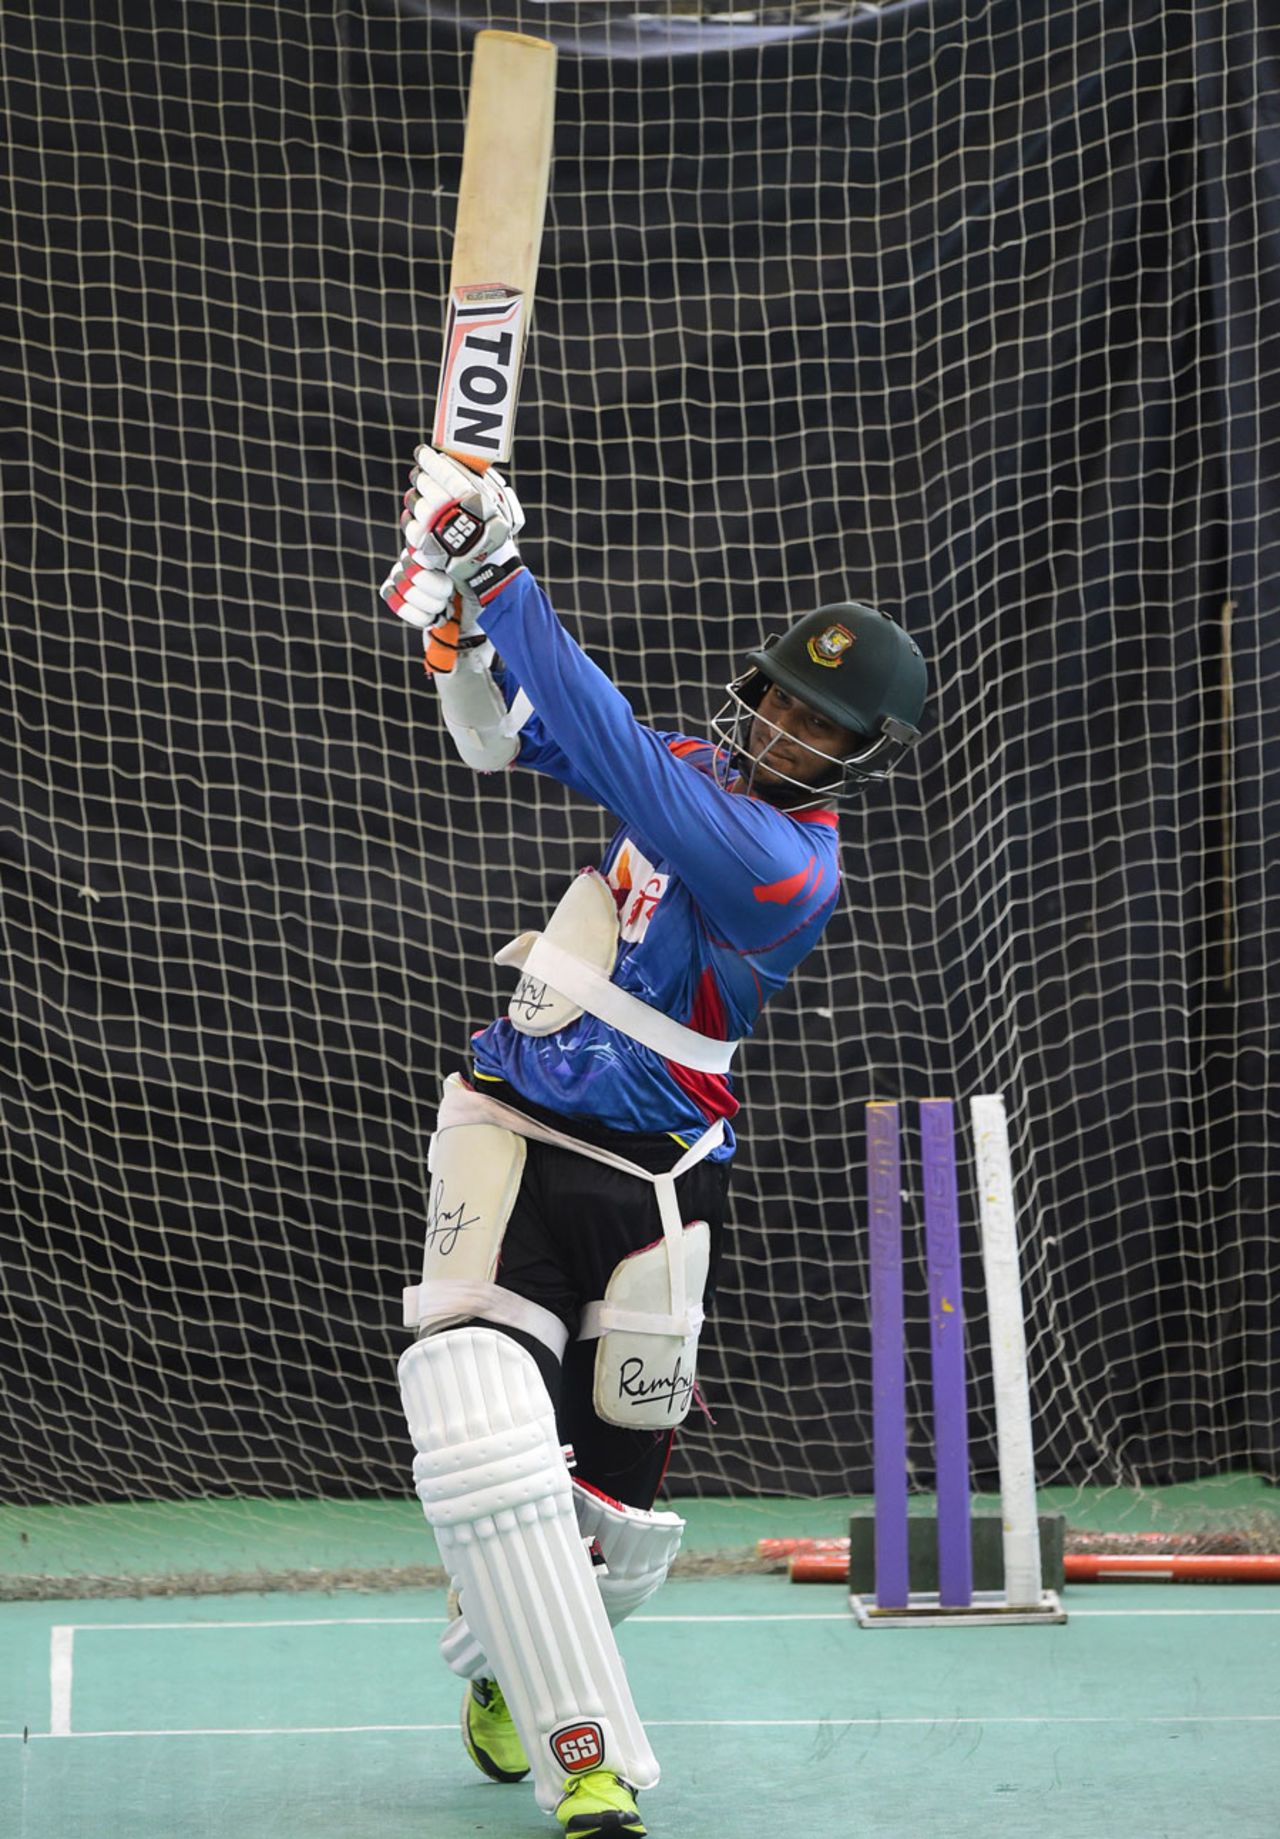 Shakib Al Hasan bats in the nets ahead of the first Test, Chittagong, July 20, 2015